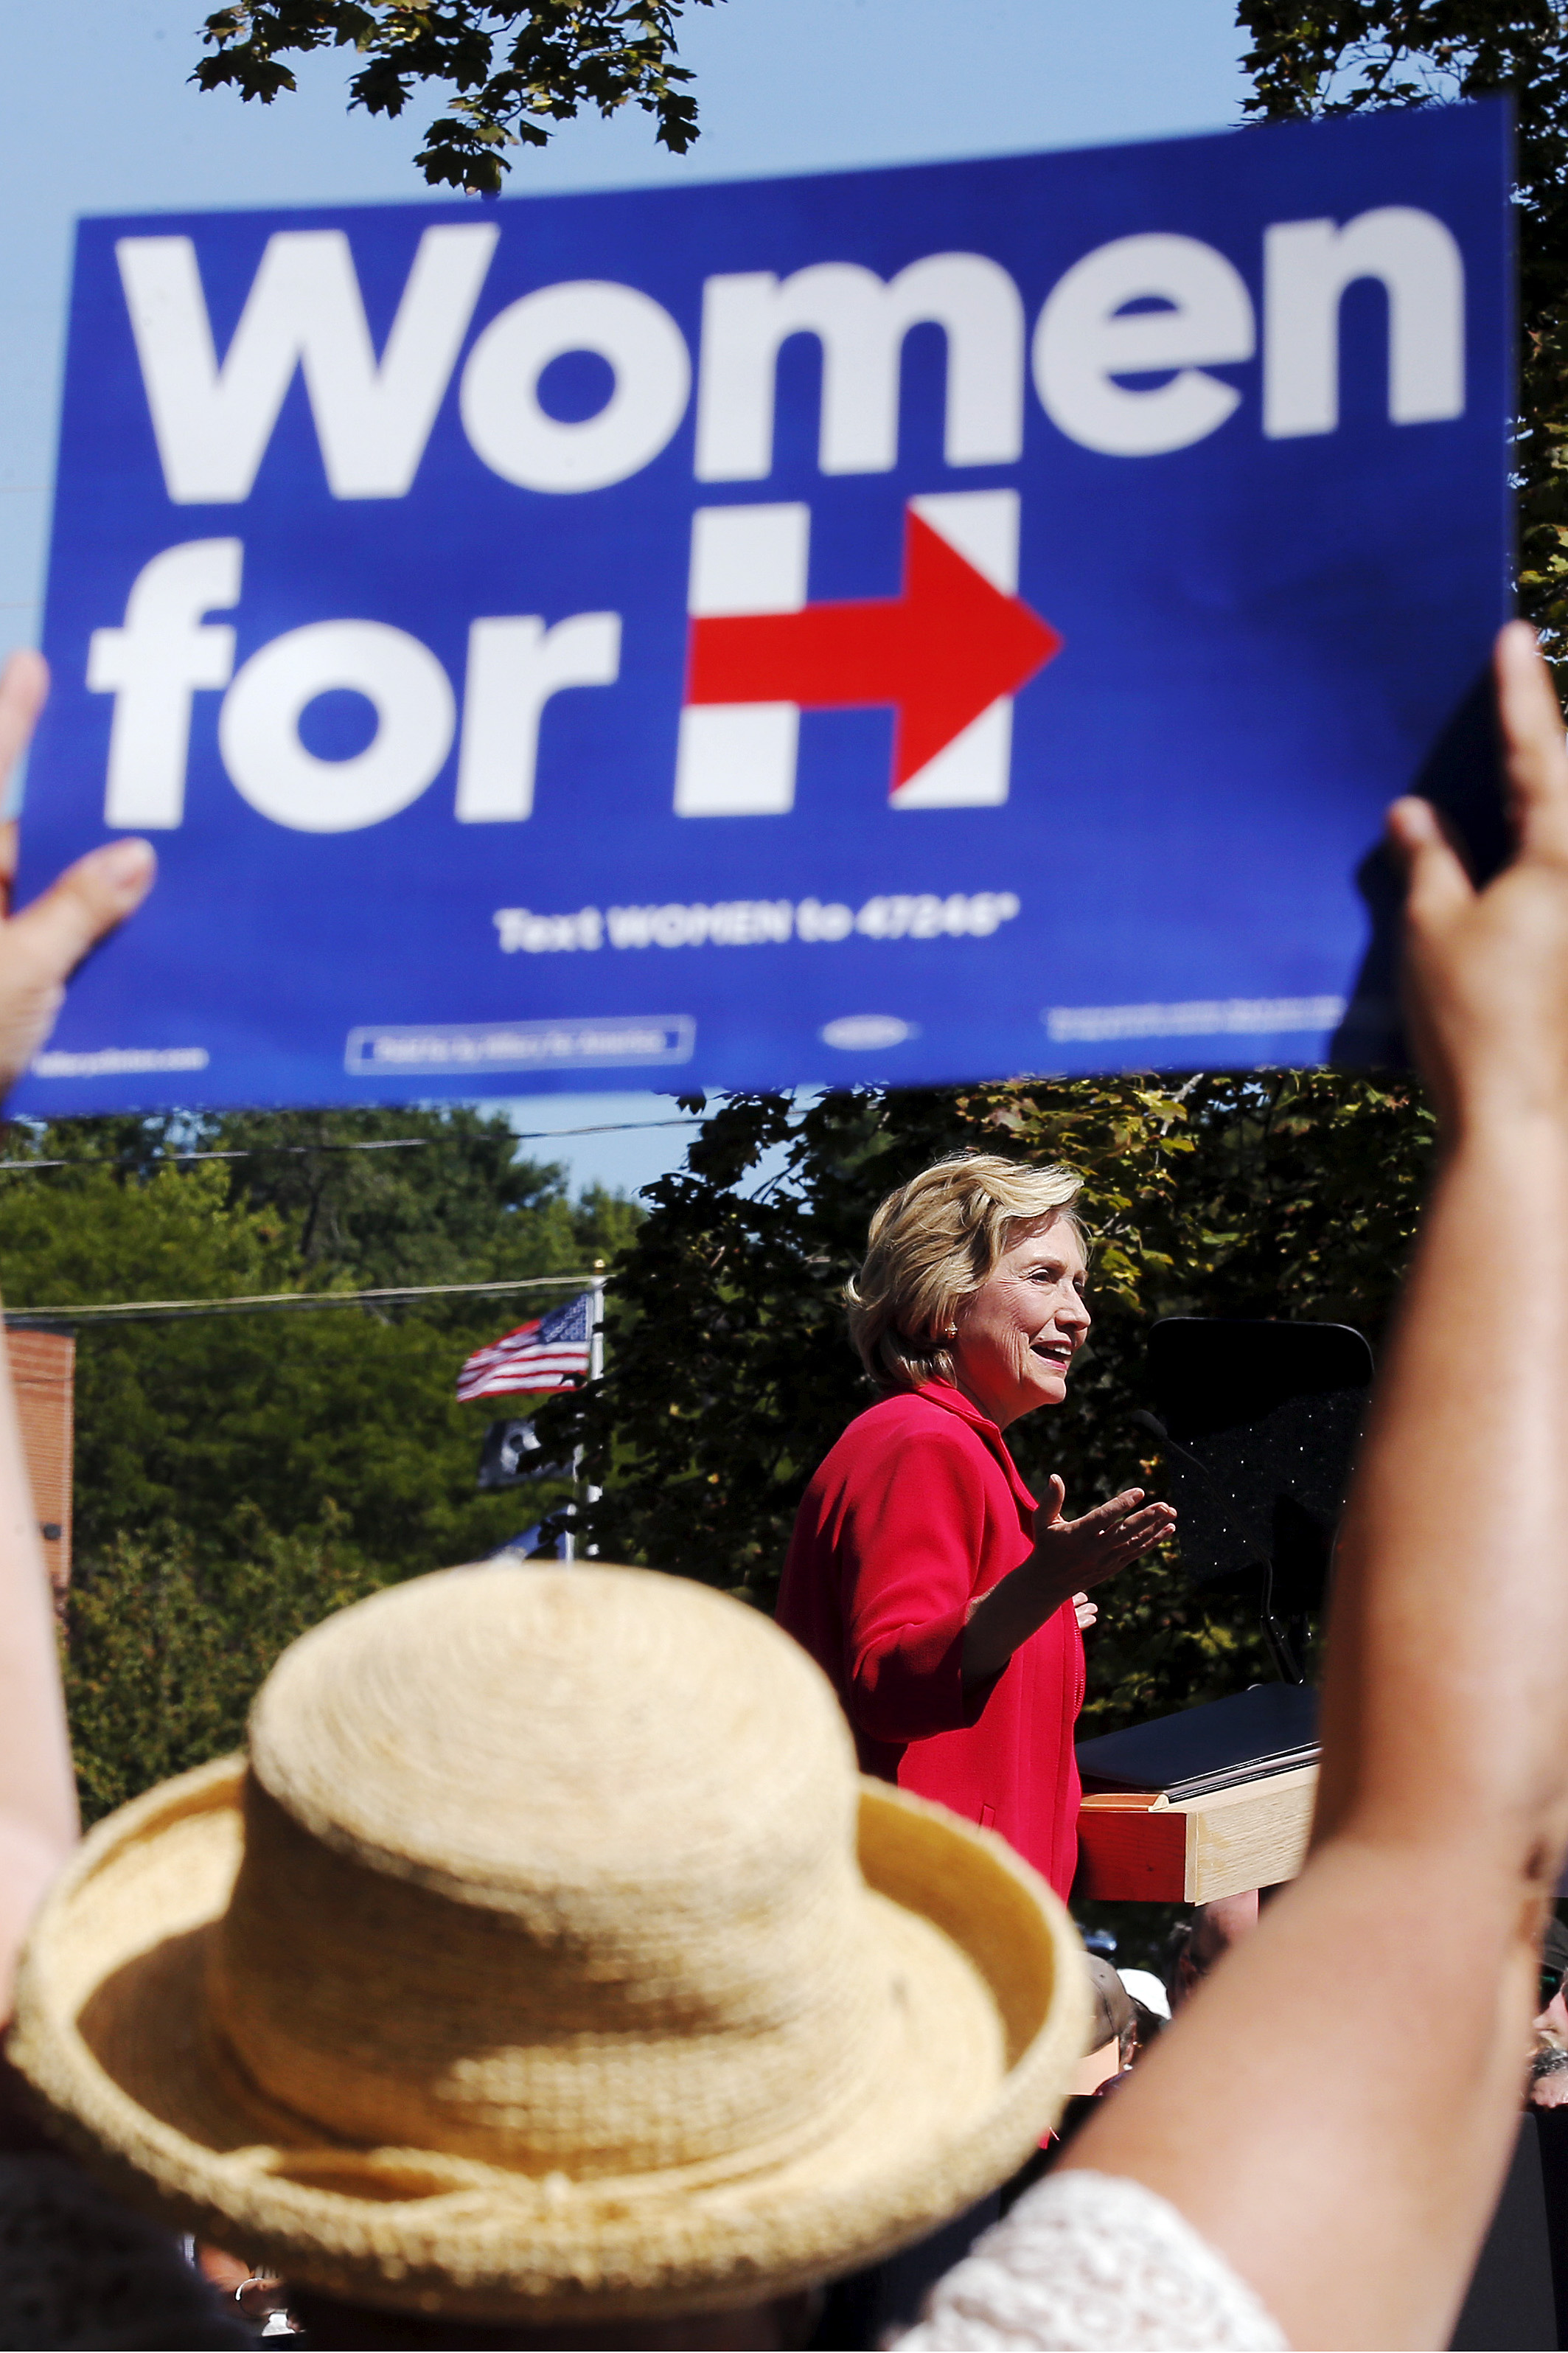 U.S. Democratic presidential candidate Hillary Clinton speaks at a "Women for Hillary" campaign rally in Portsmouth